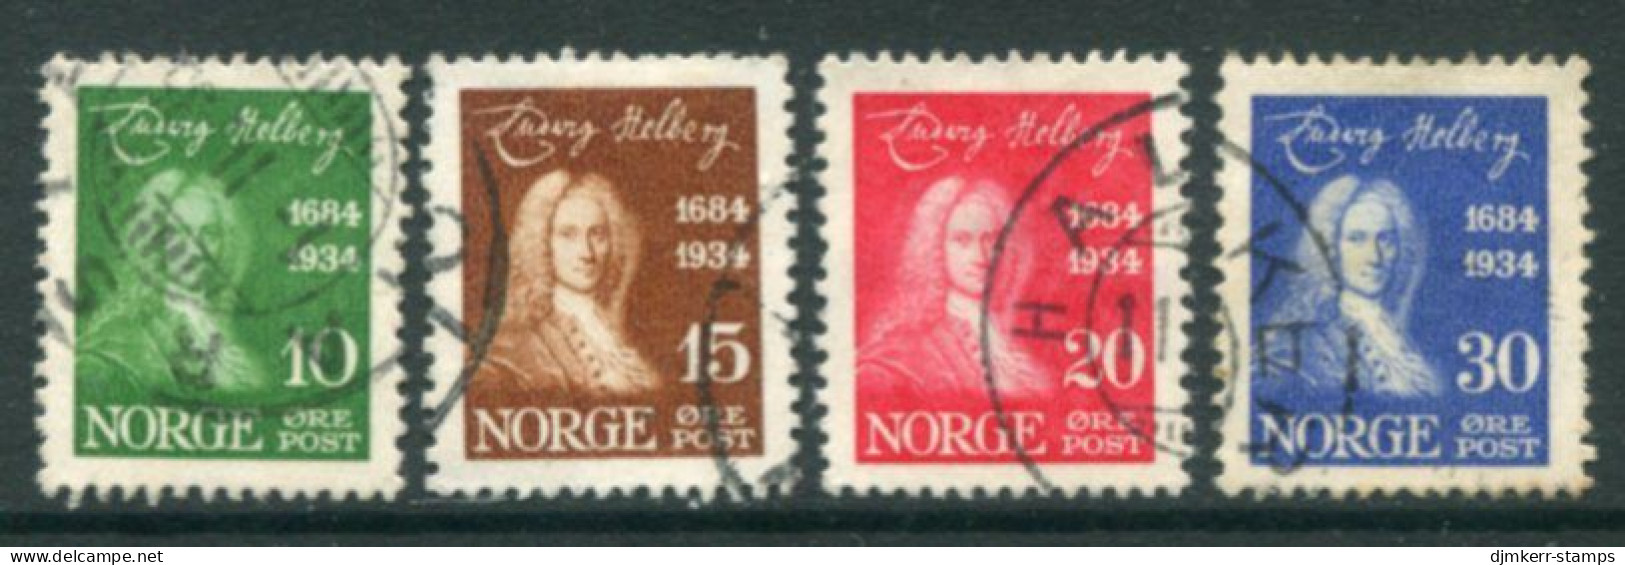 NORWAY 1934 Holberg Anniversary Set Used.  Michel 168-71 - Used Stamps